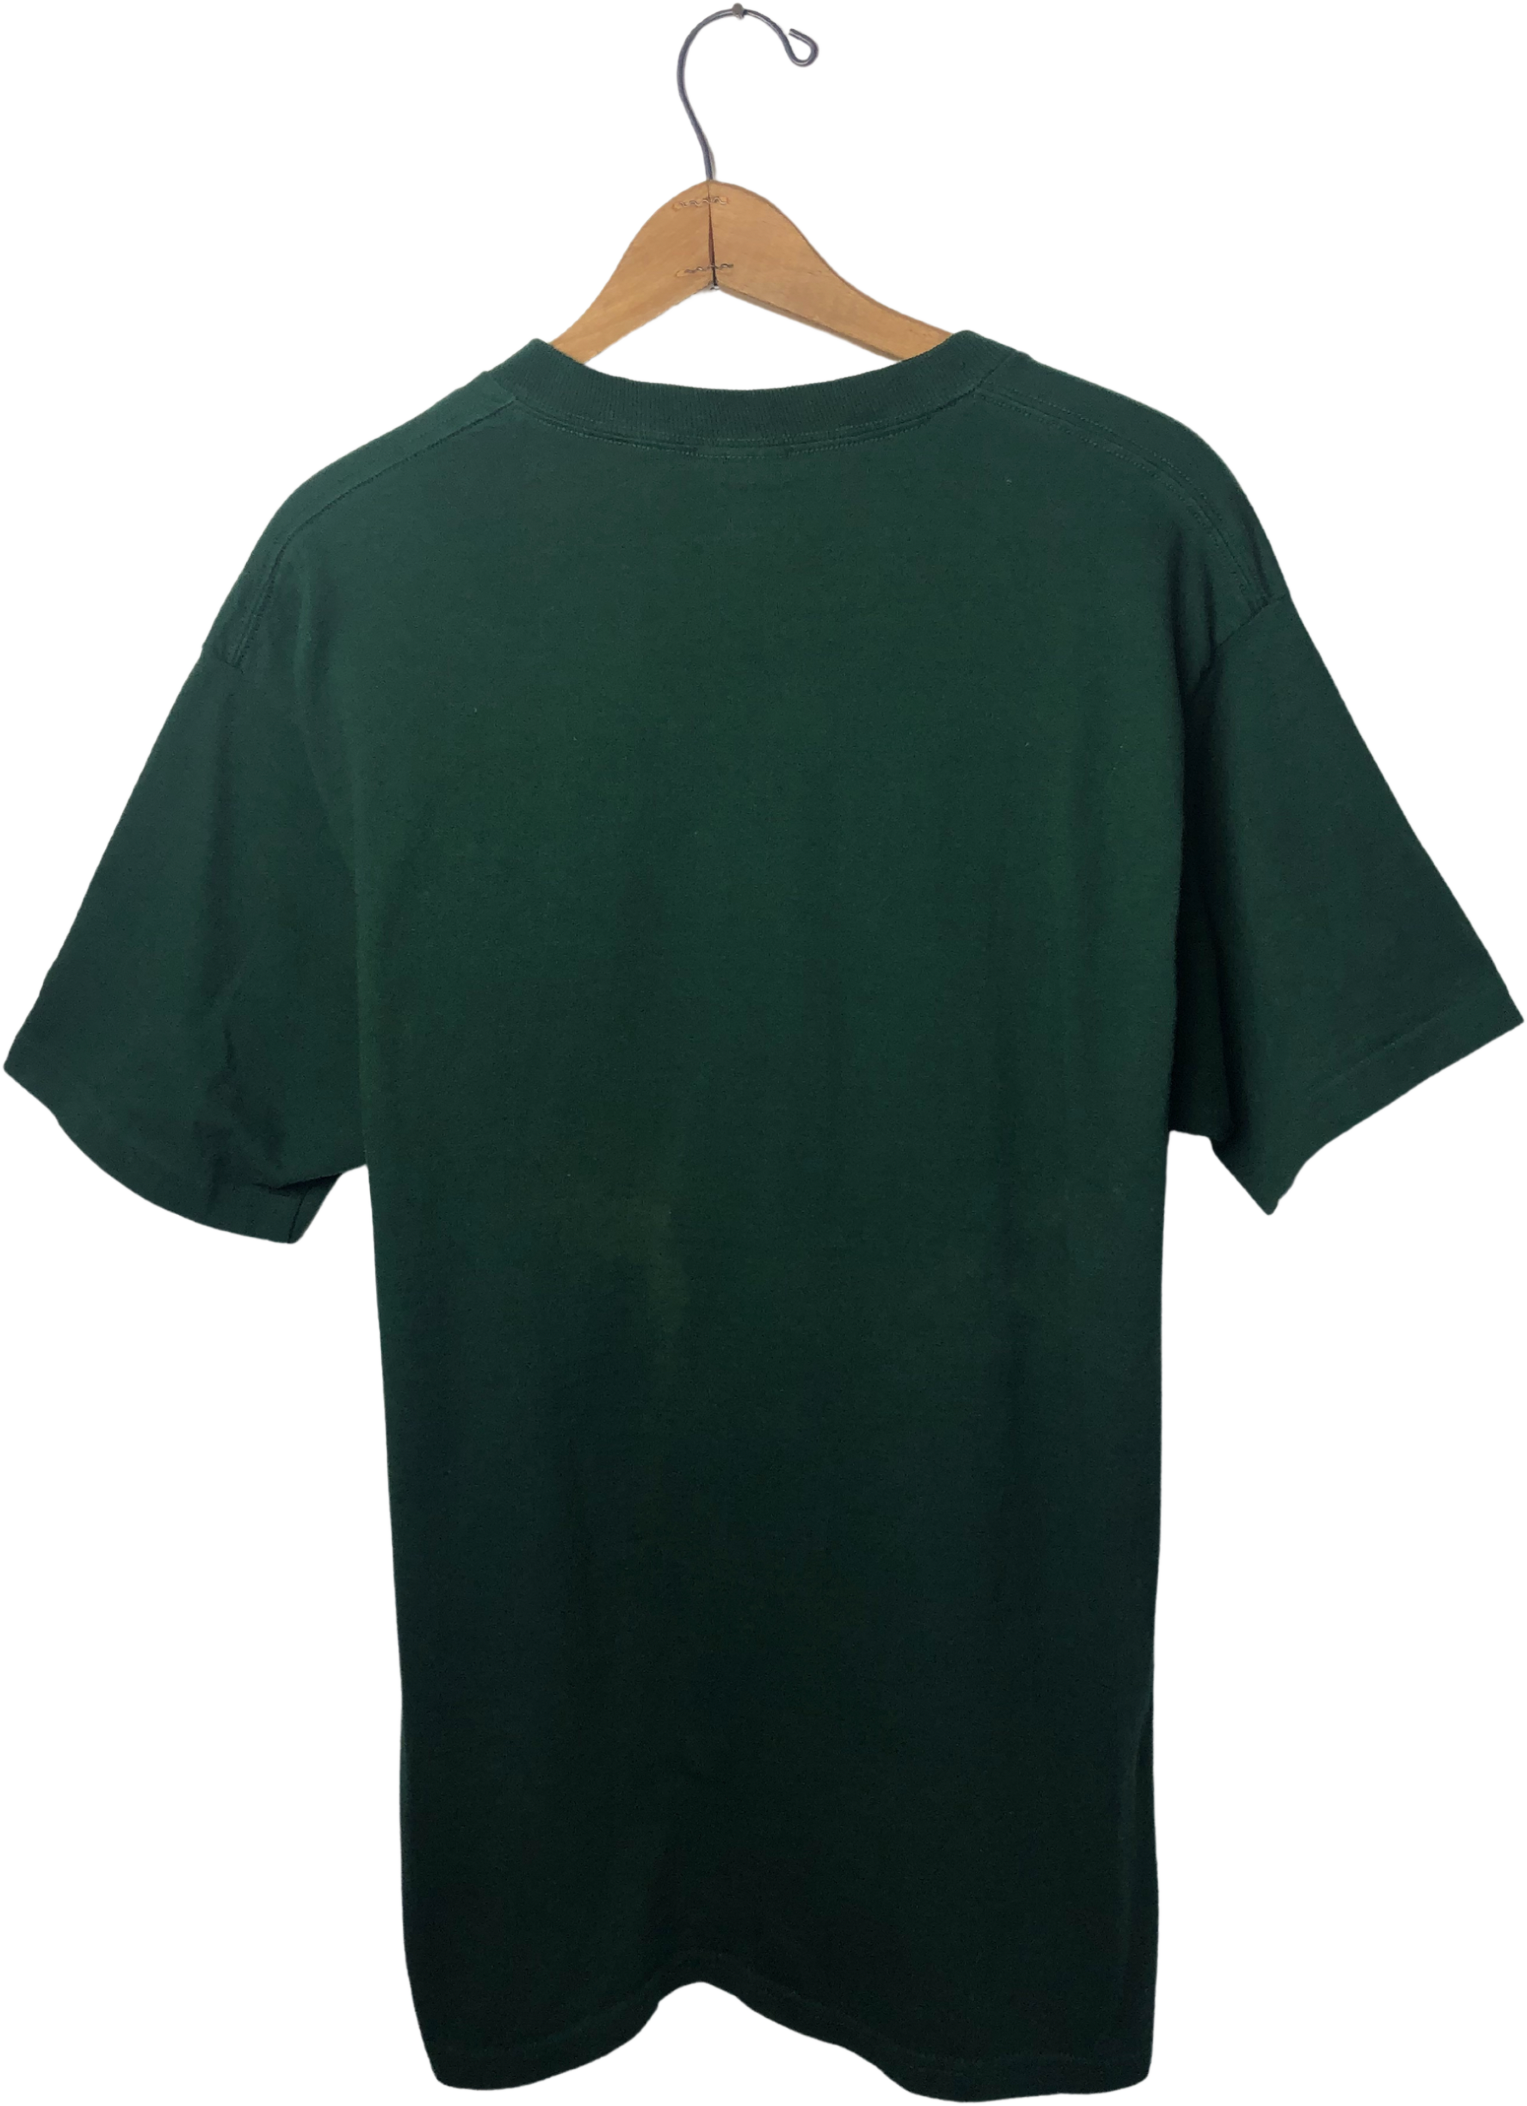 OKAYPLAYER Vintage Green Bay Packers T-Shirt